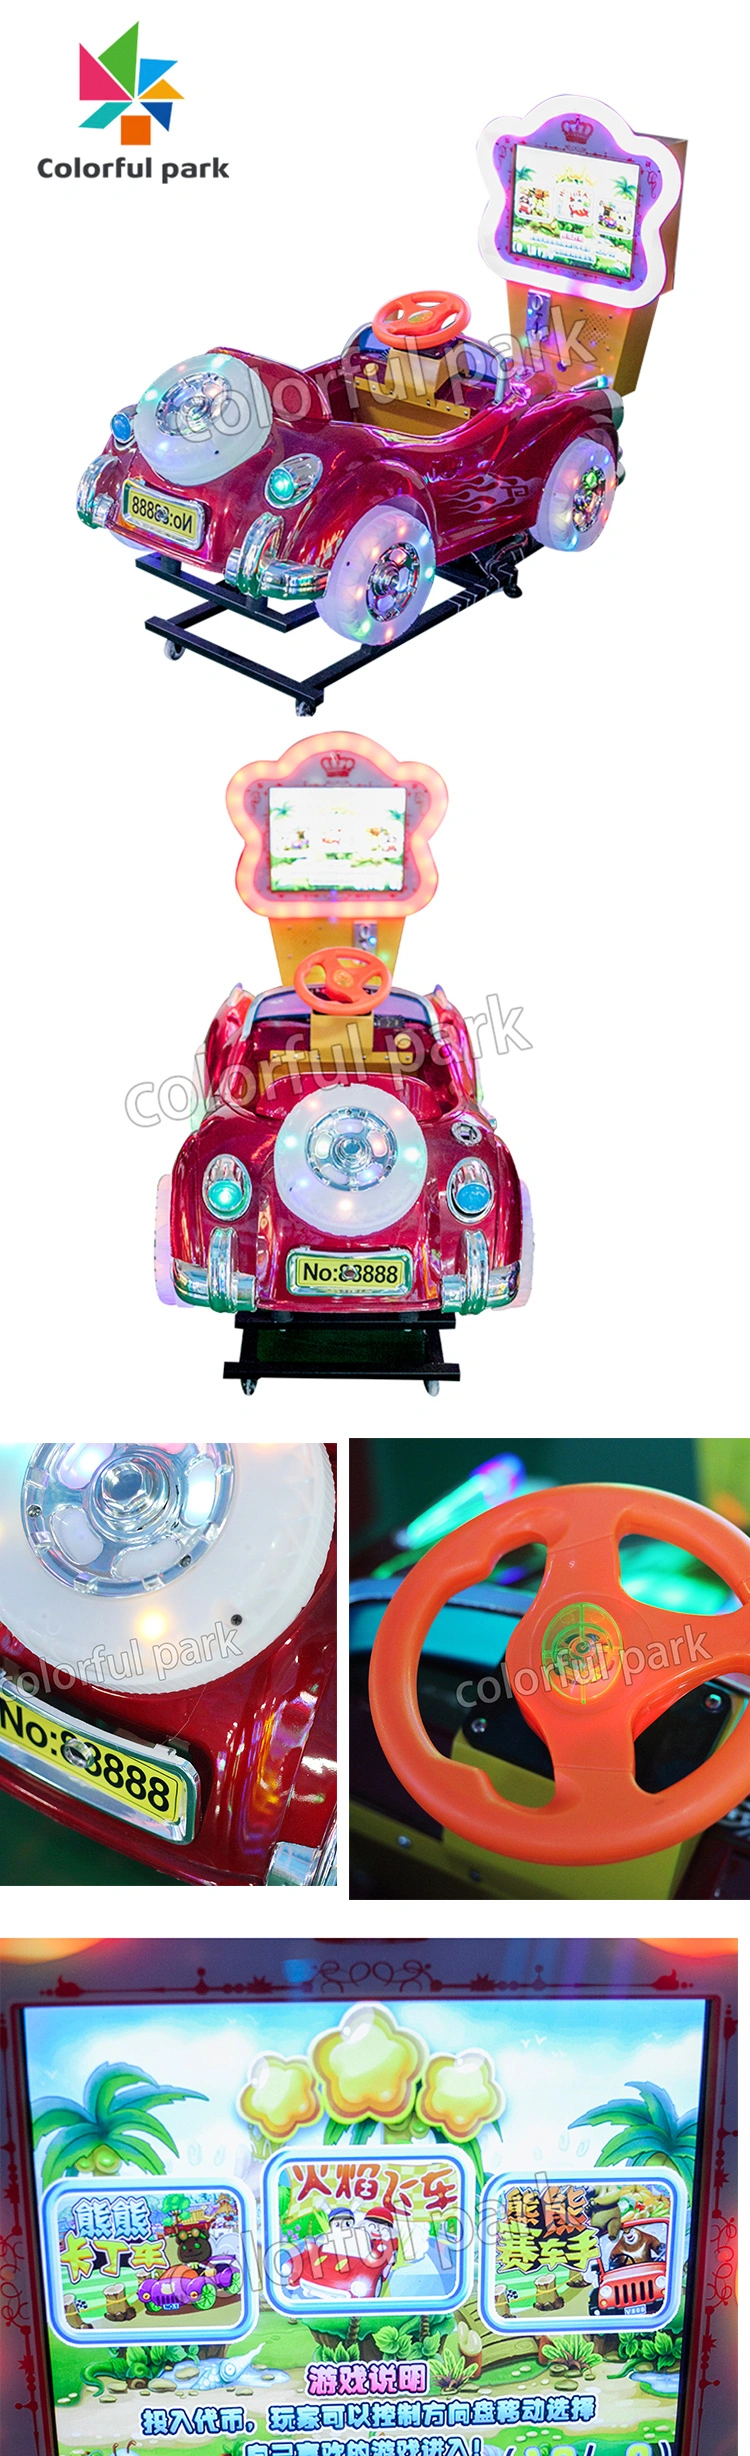 Colorful Park Coin Operated Children's Indoor Driving Electronic Car Arcade Riding Game Machine